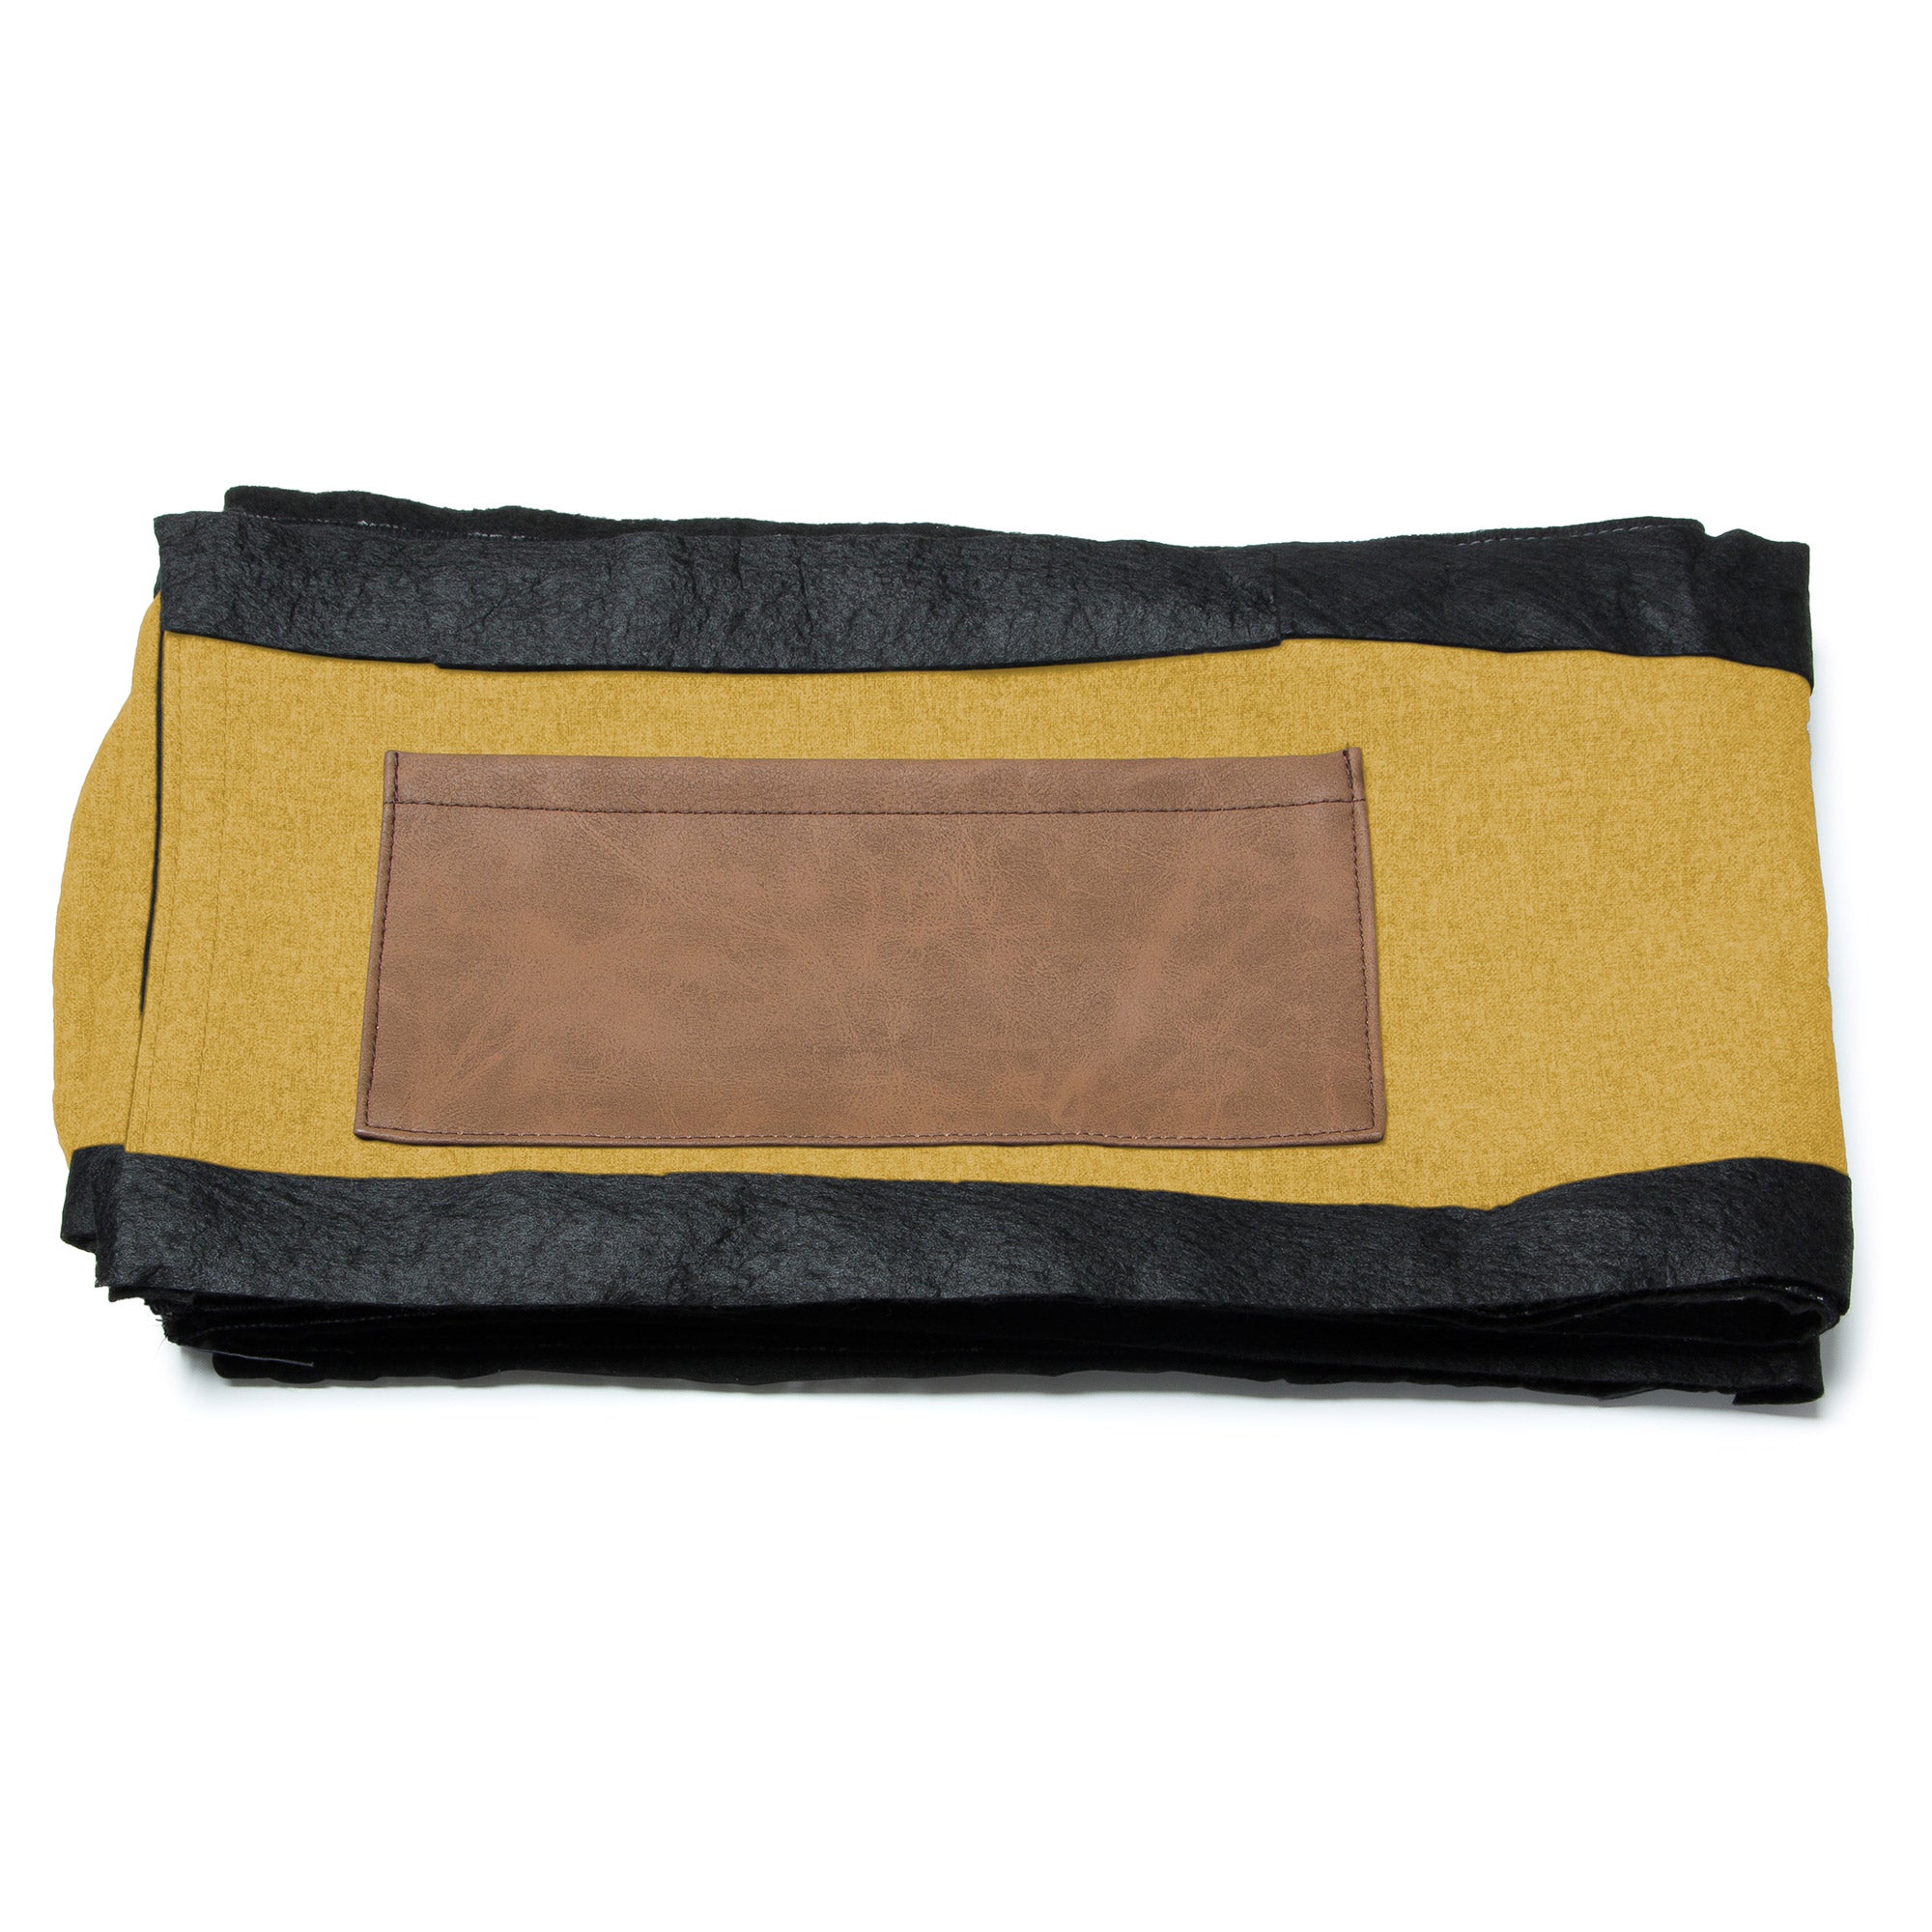 Dyla bed cover for a 150 x 190 cm mattress in mustard